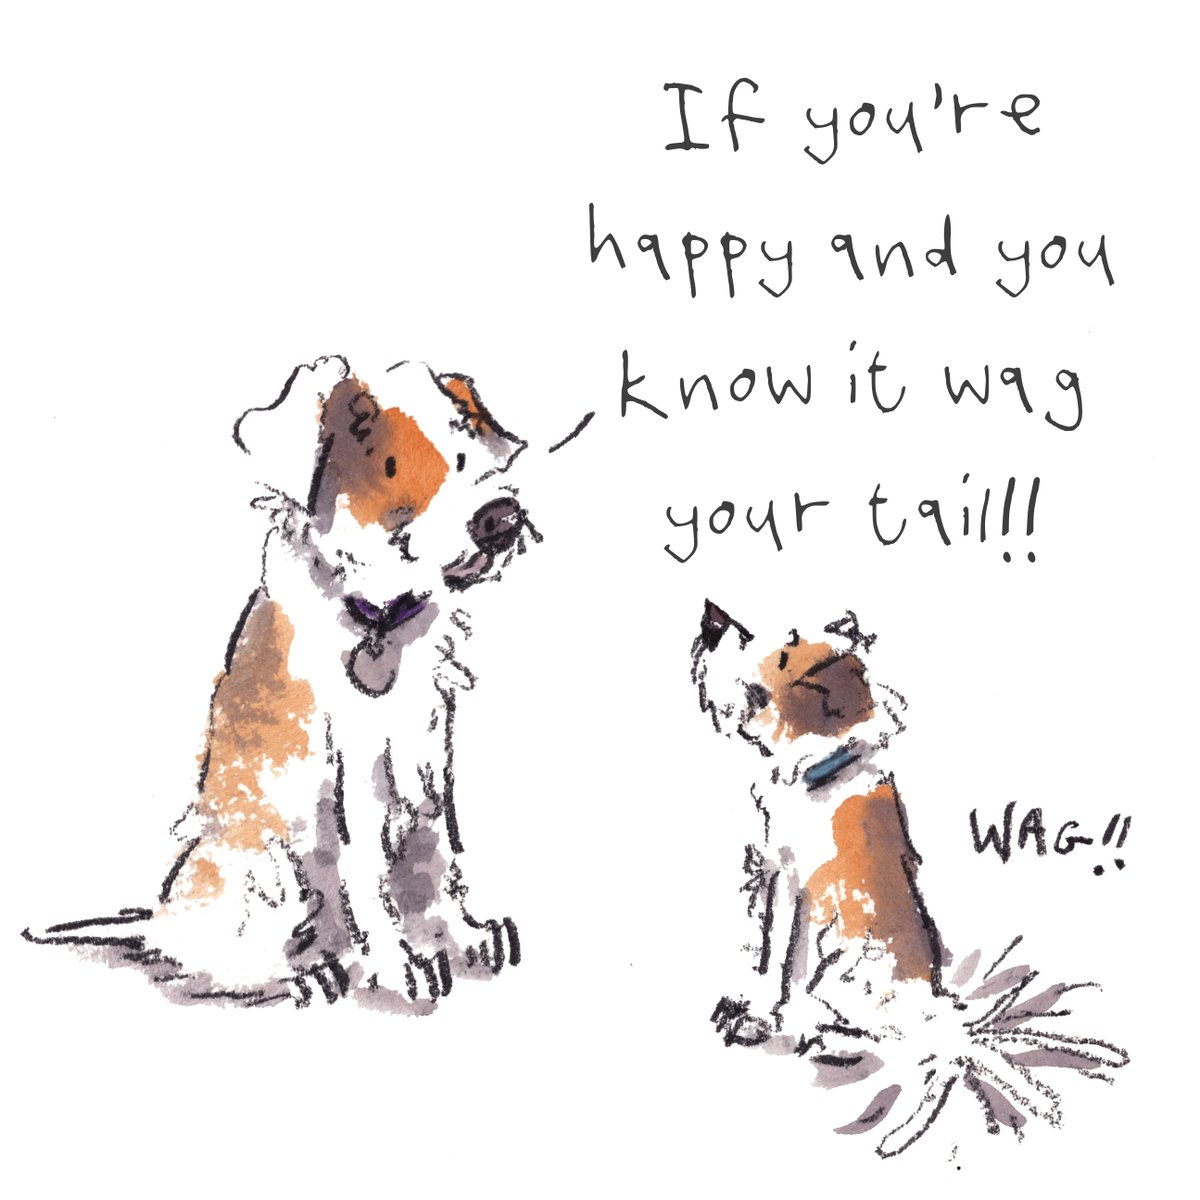 I hope that you are having a really fab day so far, lovely people and lovely dogs. Hooray for happy wagging. I'm wishing you the very best for the rest of your day. #hoorayfordogs #jackrussell #puppy #happy